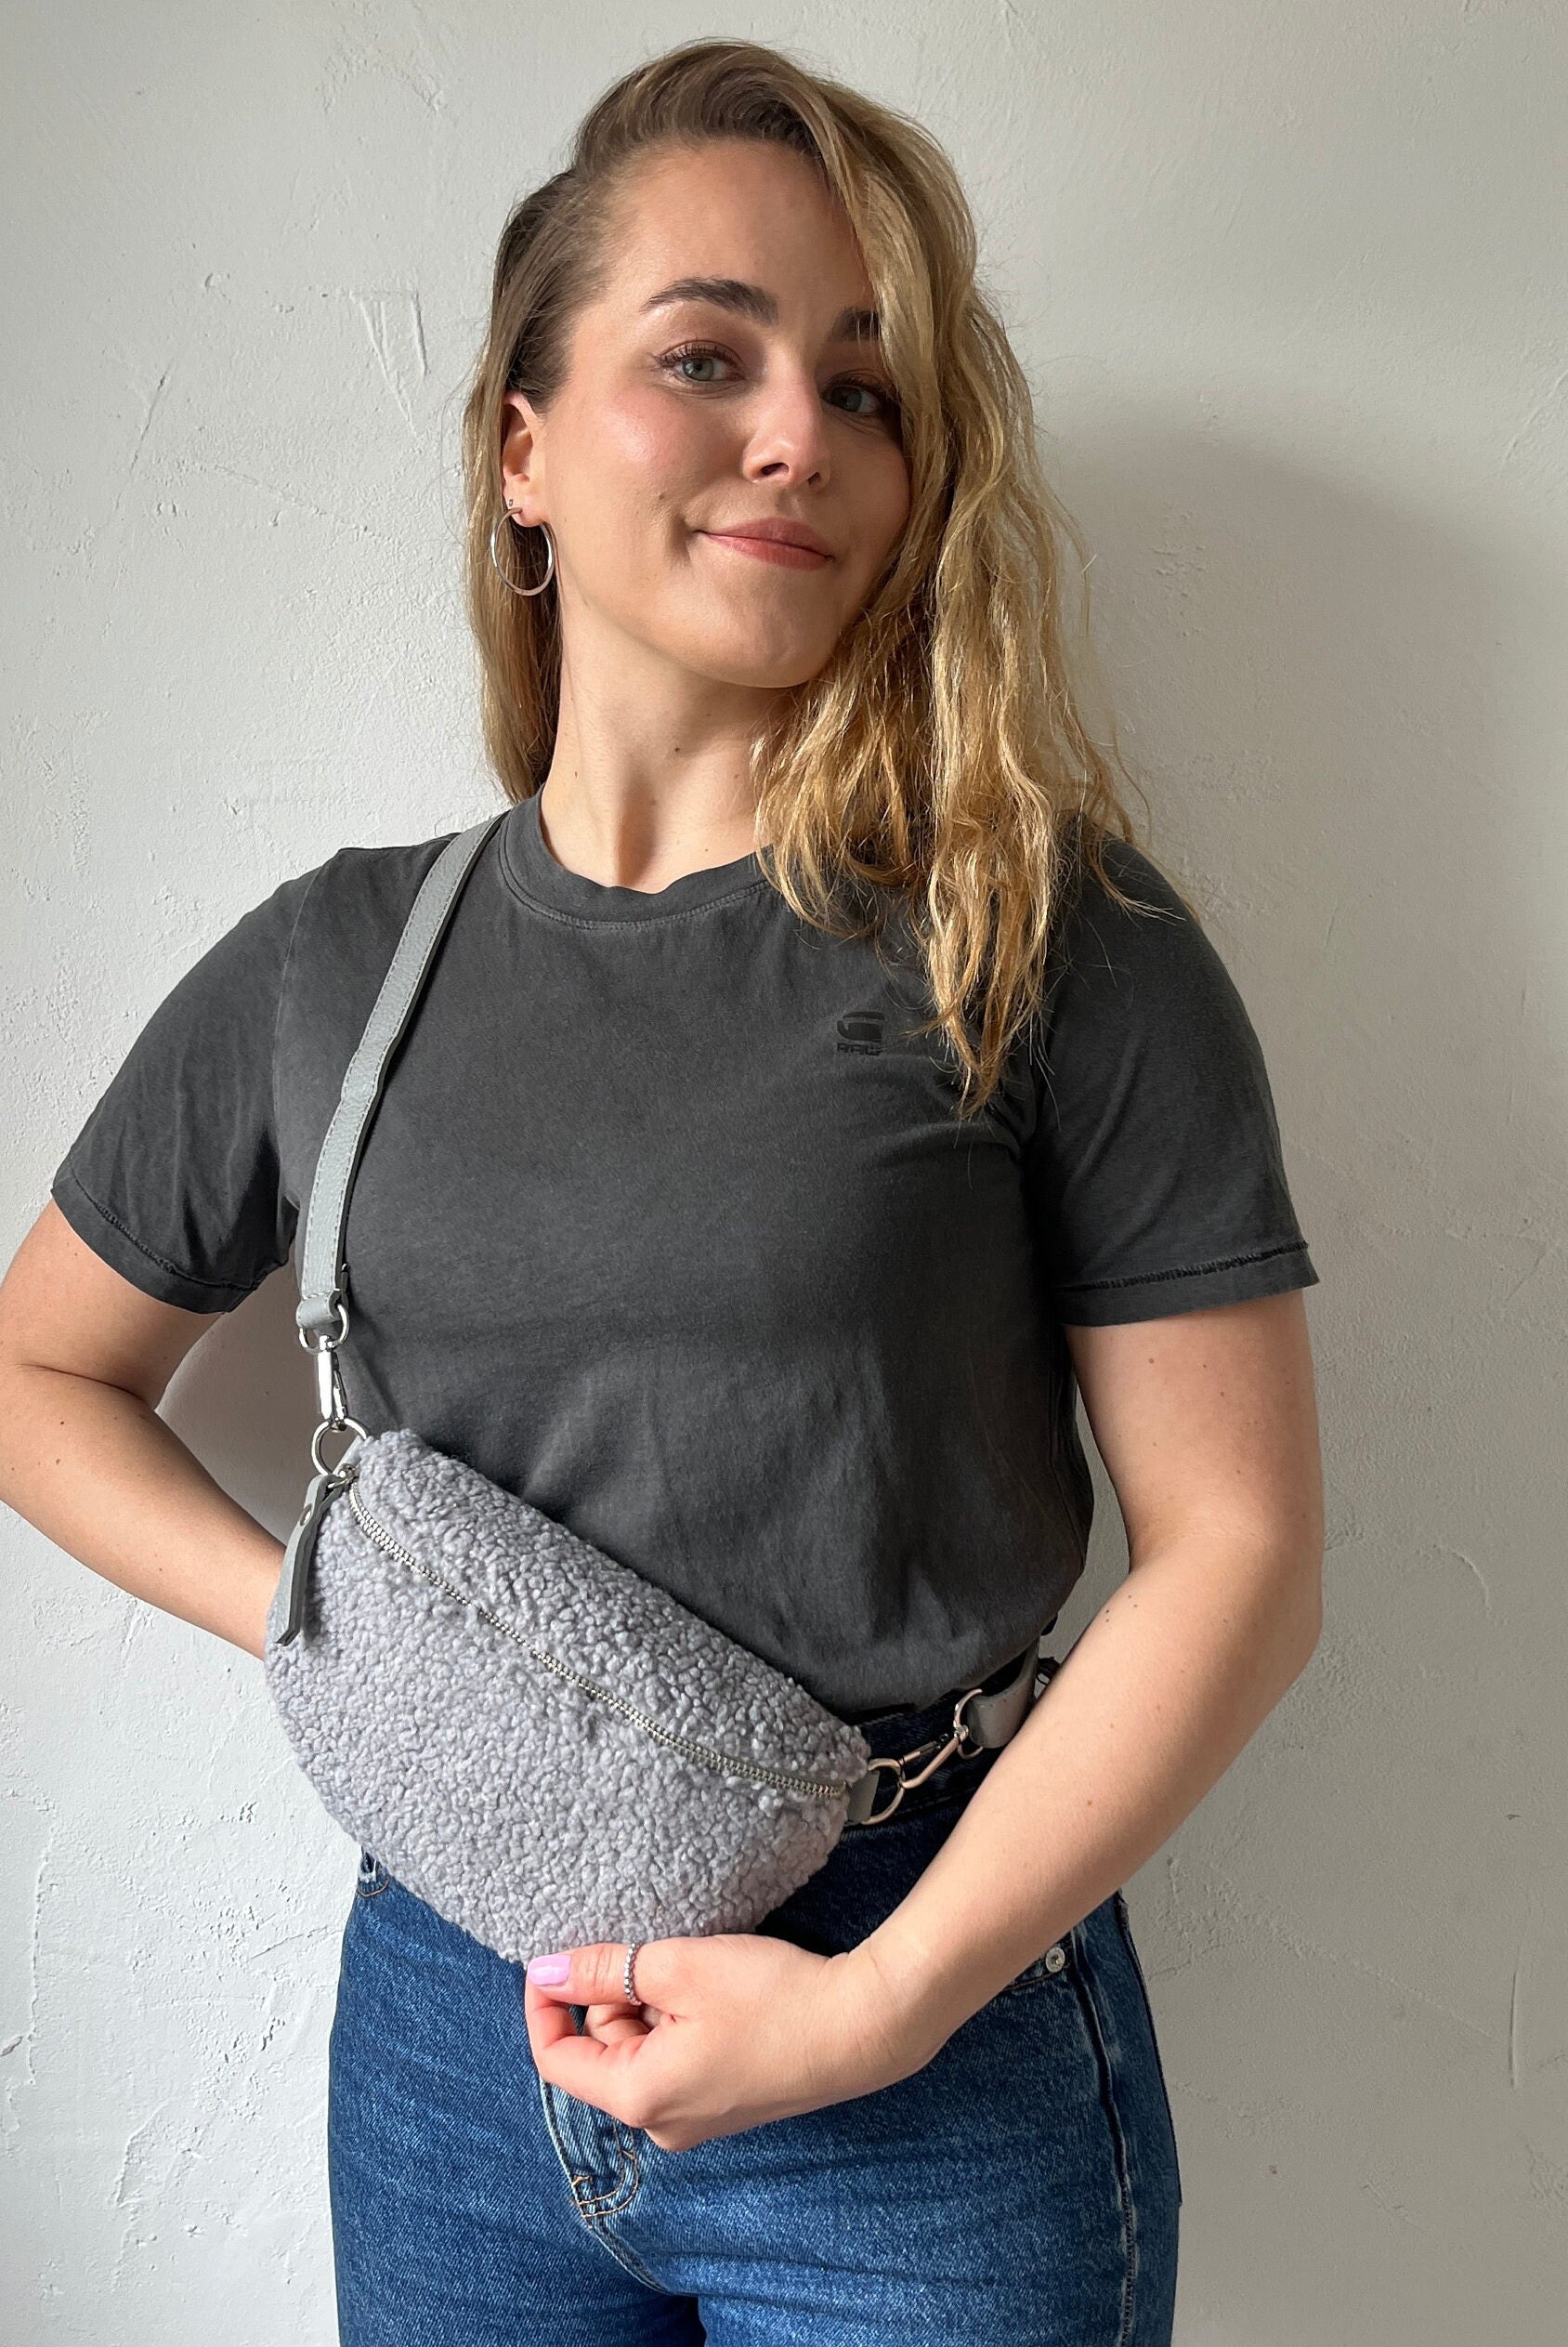 Women's Bum Bag Made of Leather and Teddy Fur in Gray -  Israel